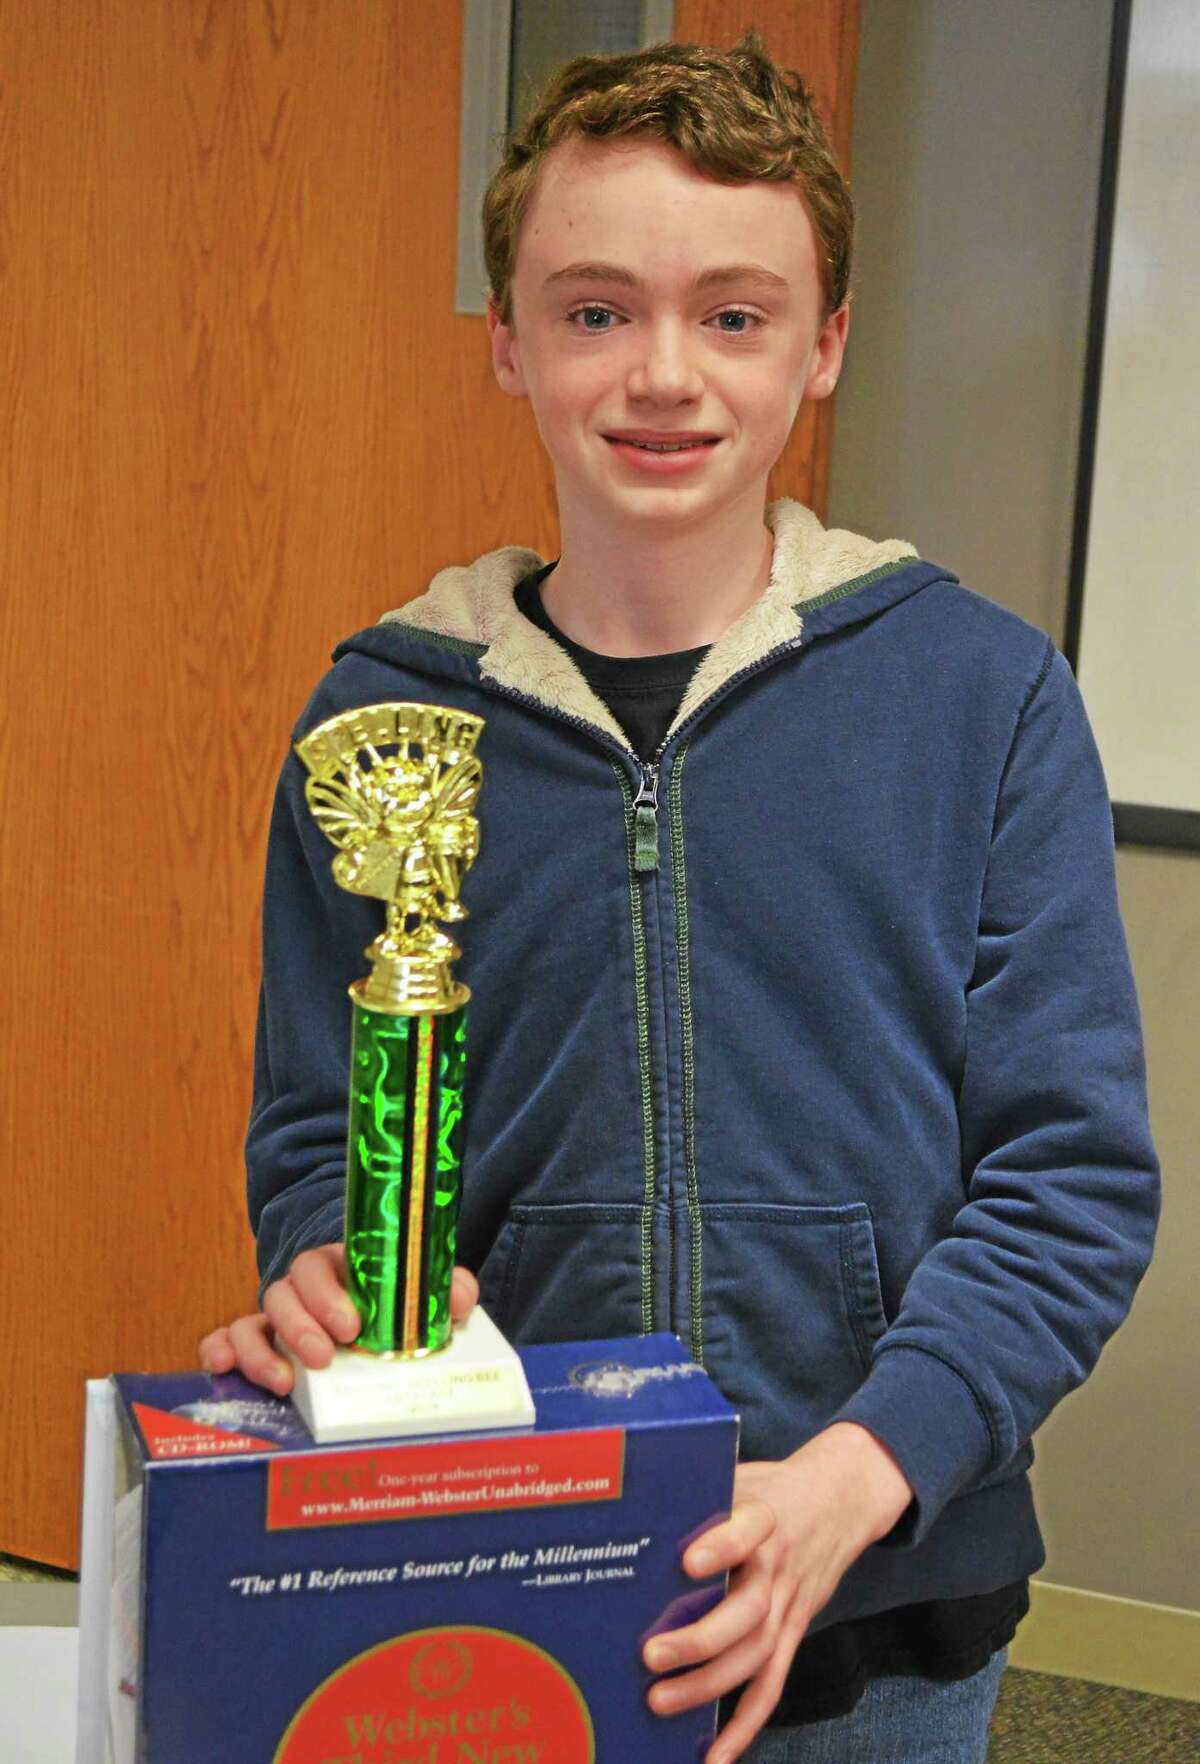 Connor Spencer of Northwestern Regional Middle School won the first Register Citizen spelling bee and will move on to the national Scripps Howard spelling bee in DC. John Berry - The Register Citizen